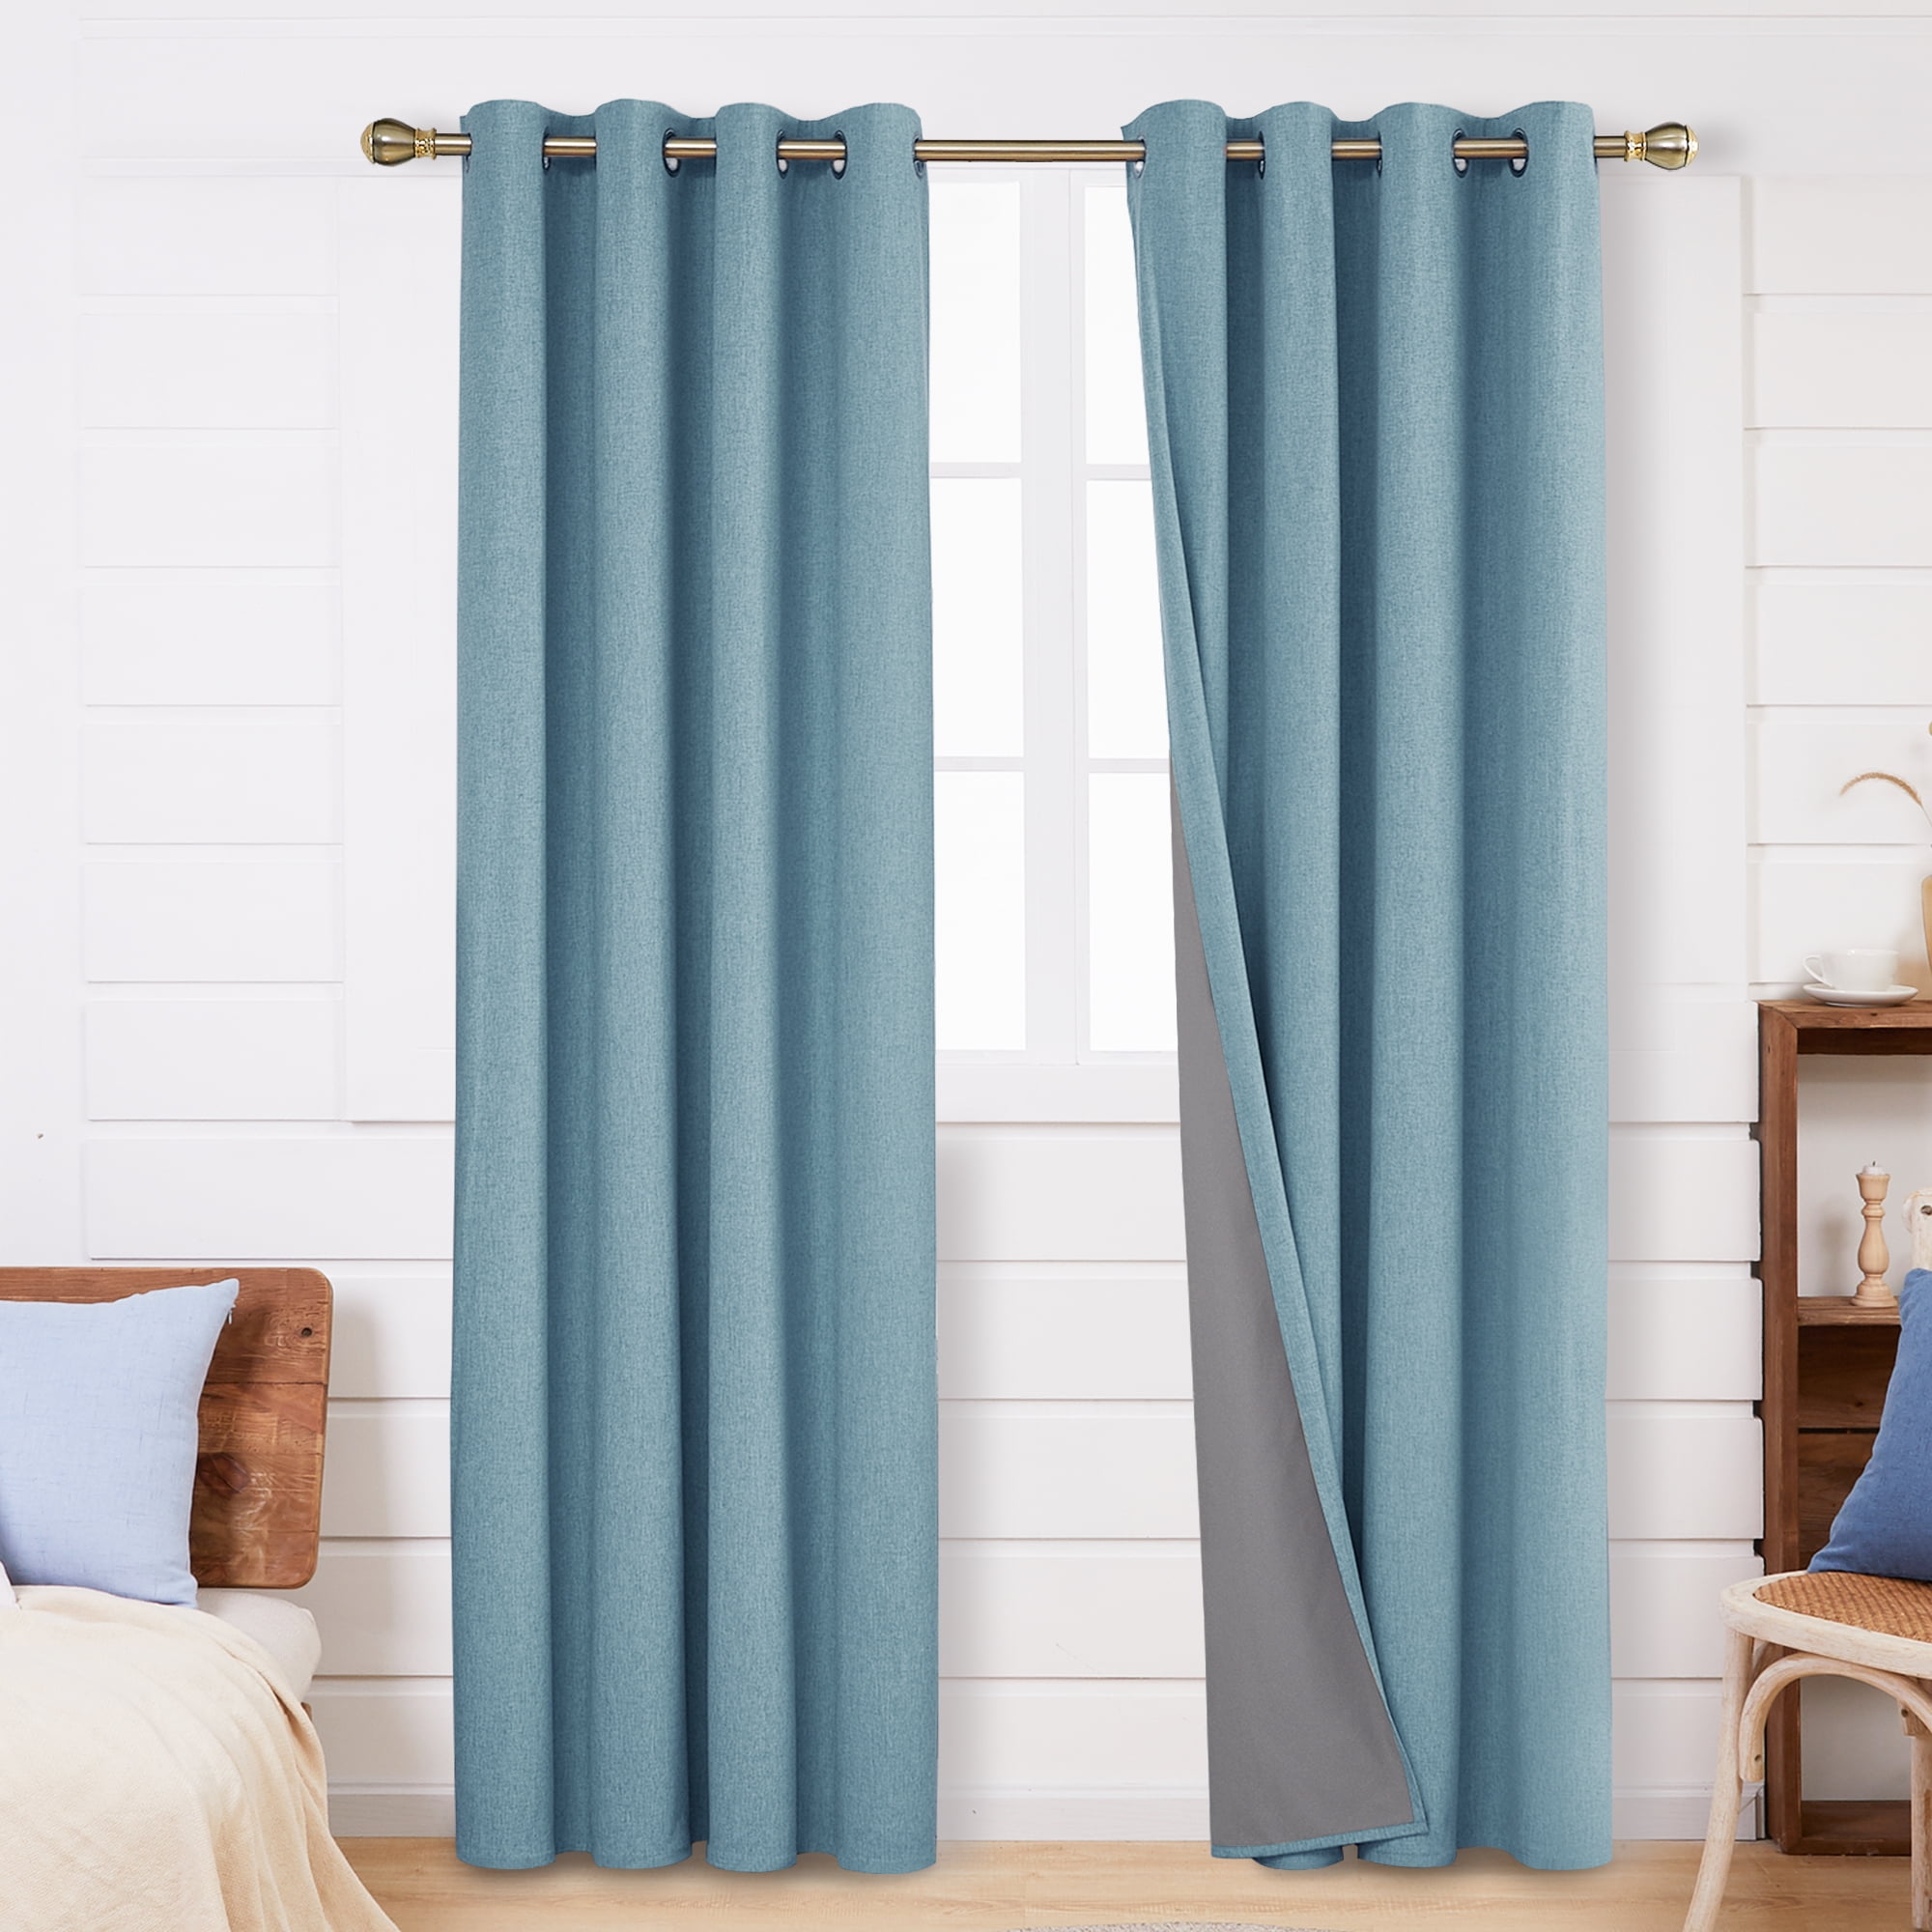 Blackout Curtain Panels Grommet  Window 52x84 Inch Insulating Room 1 & 2 Panels 